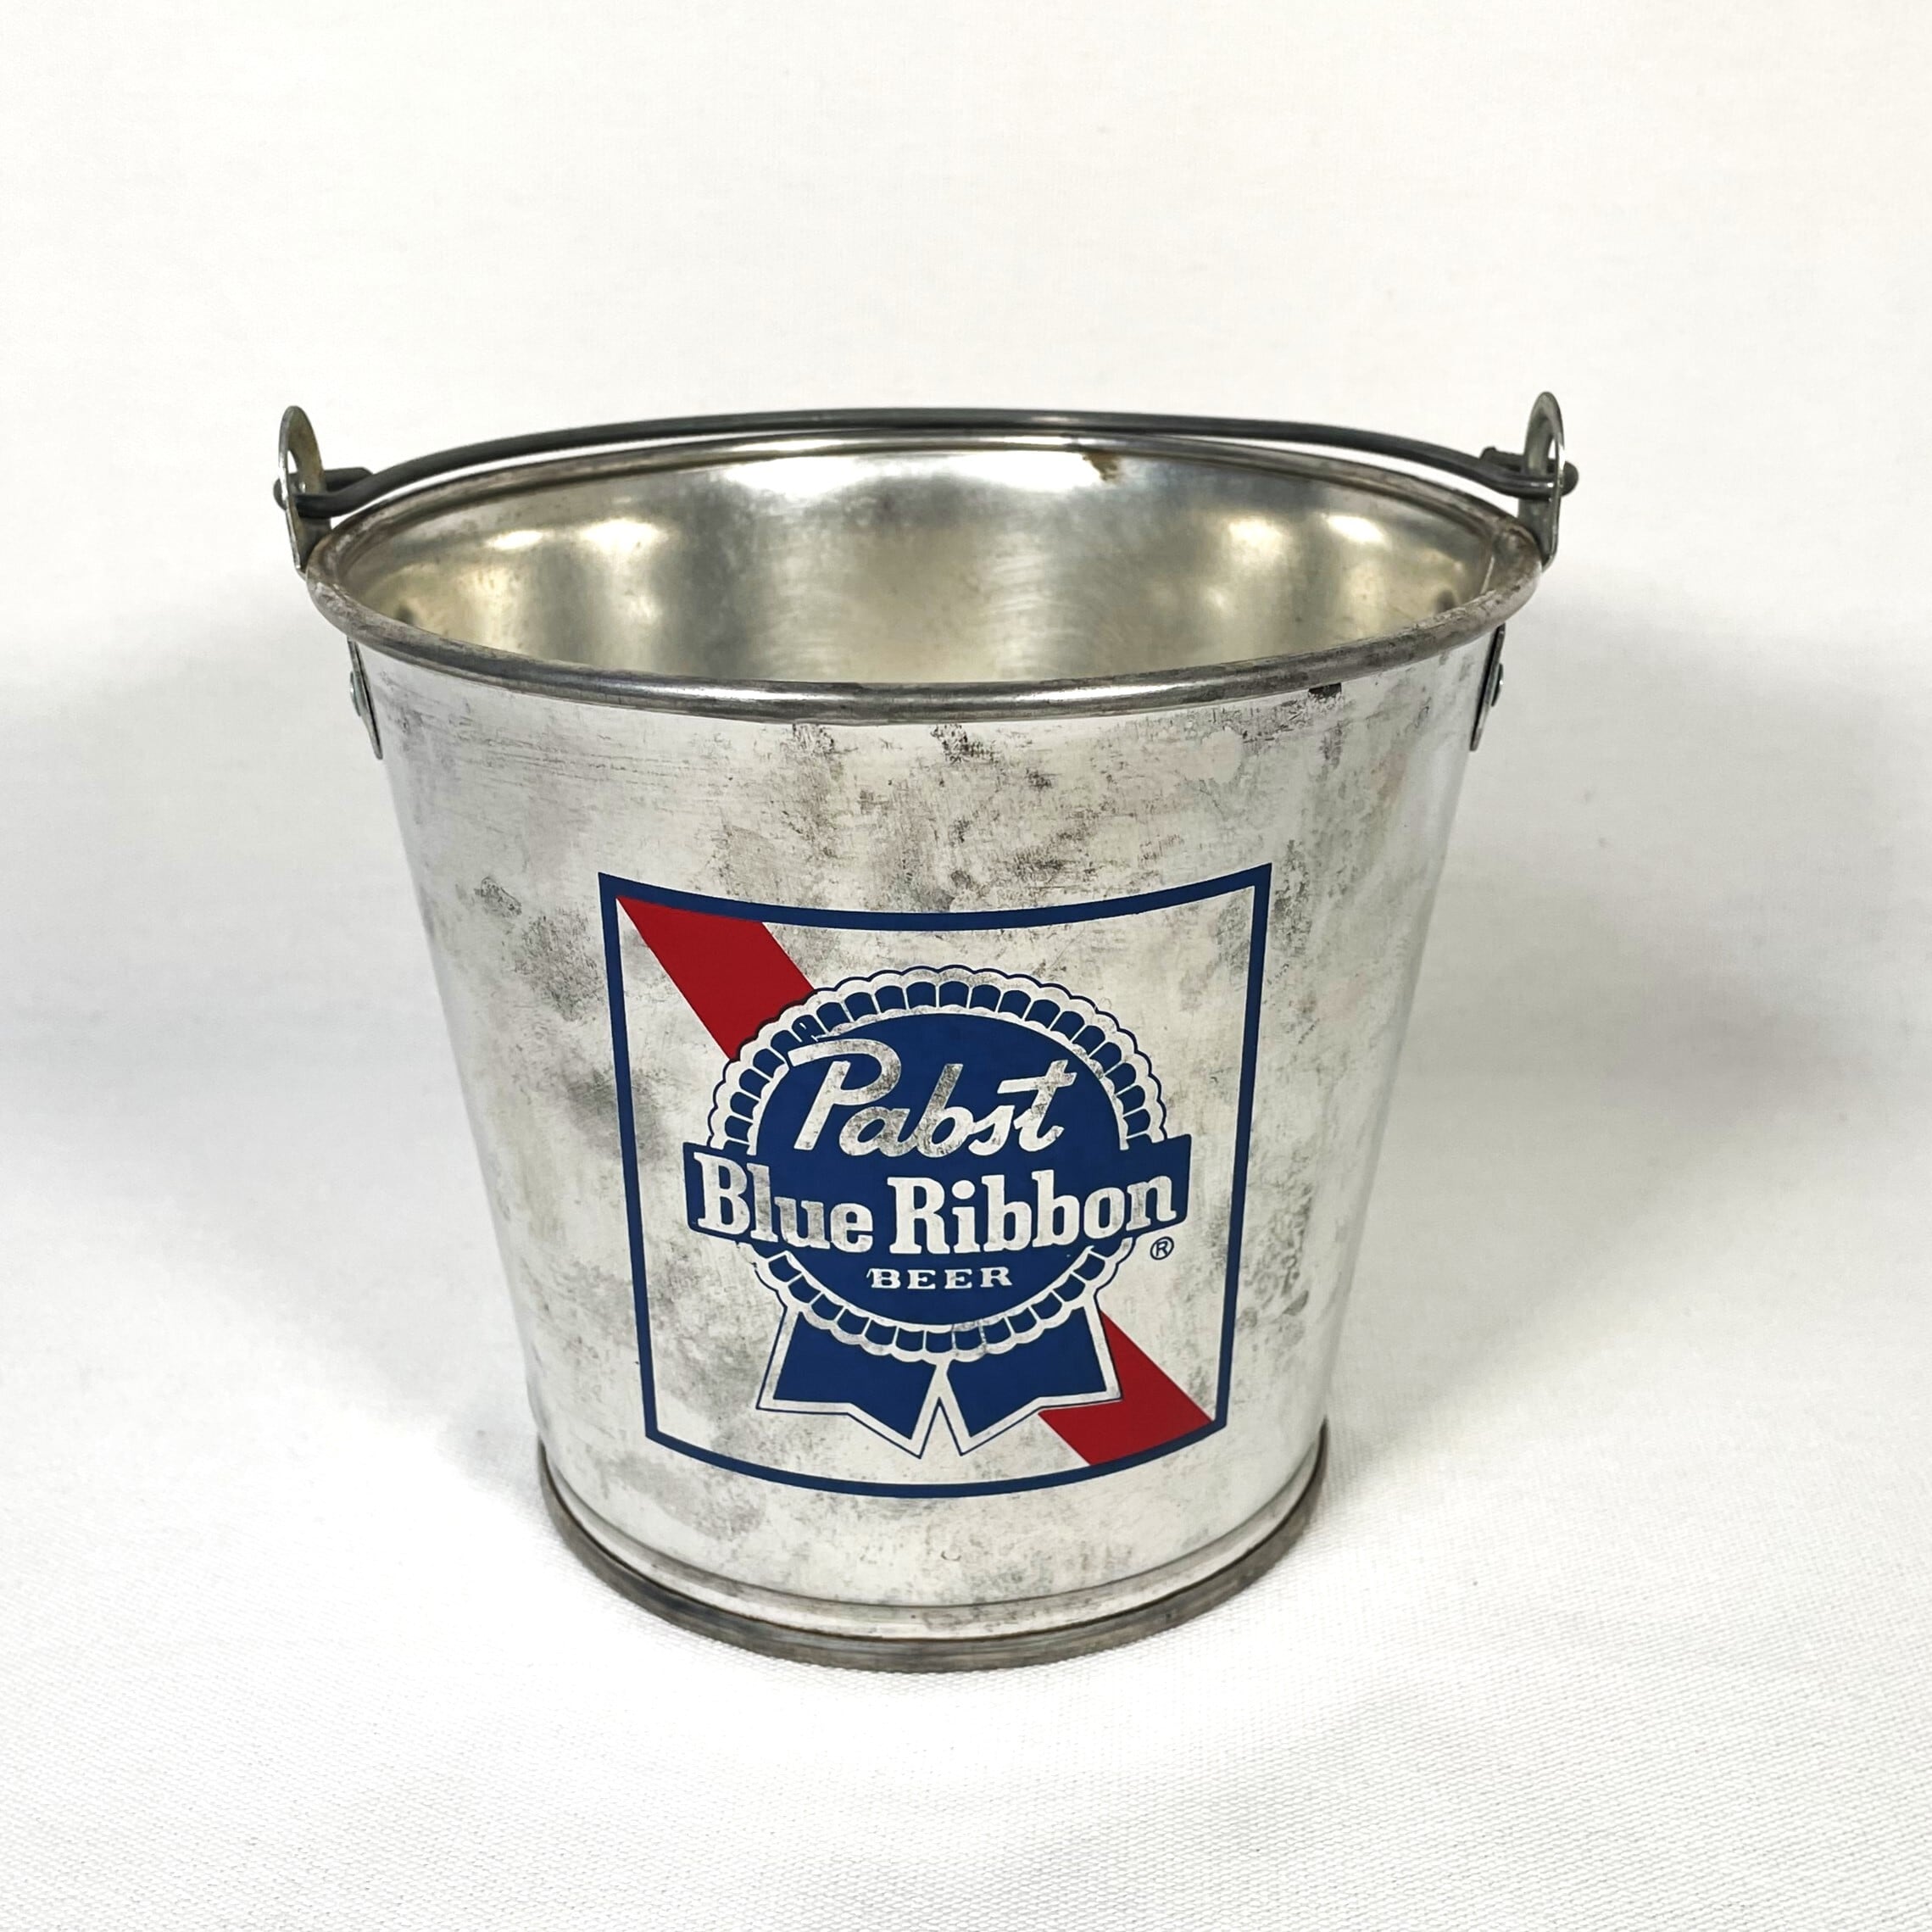 Pabst Blue Ribbon Mini Beer Bucket | YUH ANTIQUE